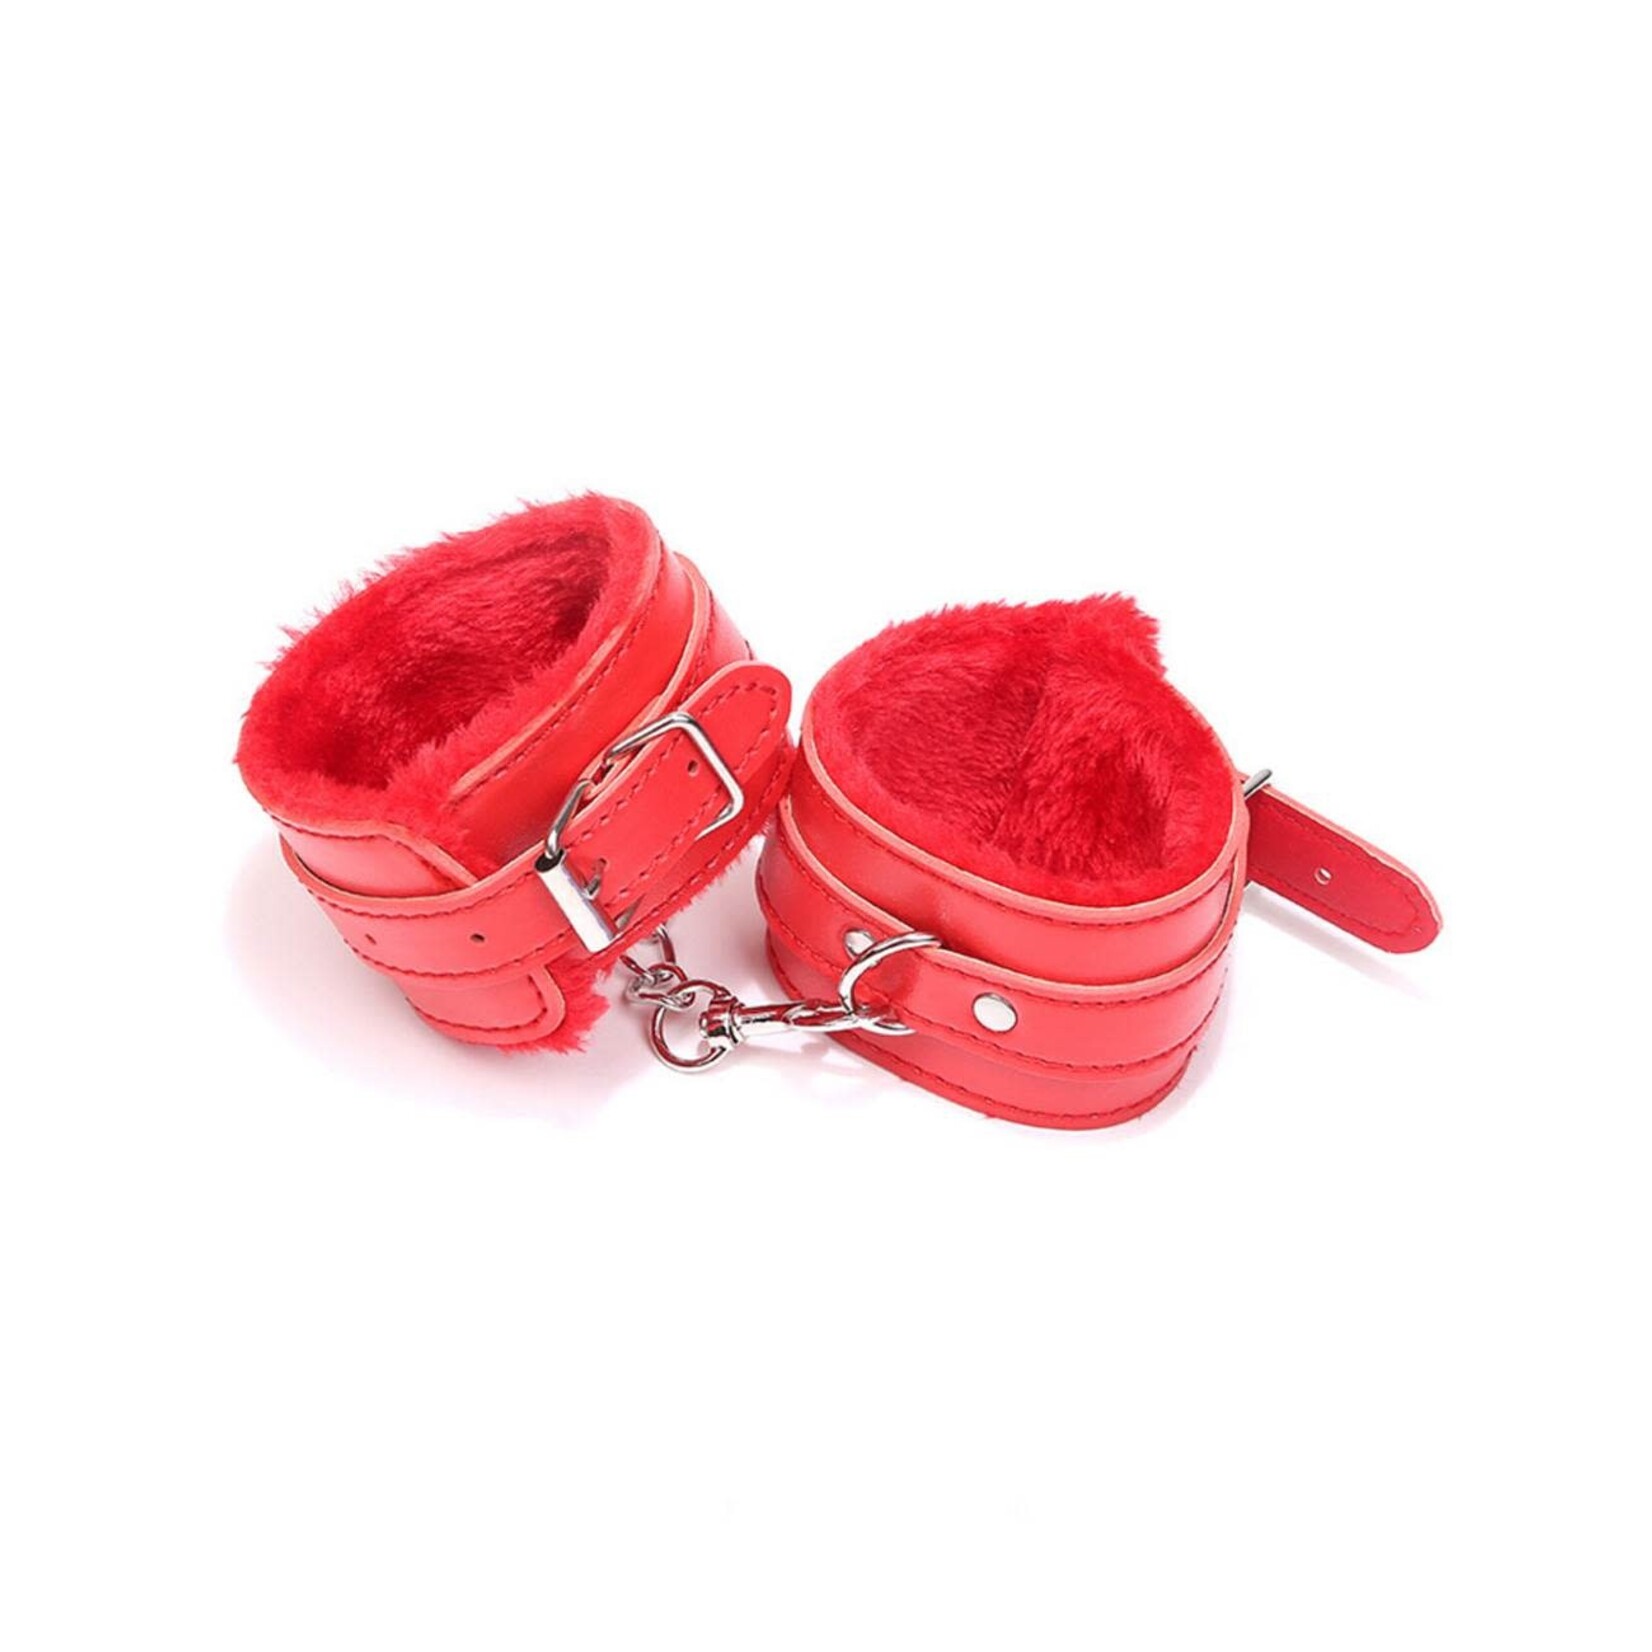 OH YEAH! -  RED SM BONDAGE SEX LEATHER HANDCUFFS ONE SIZE